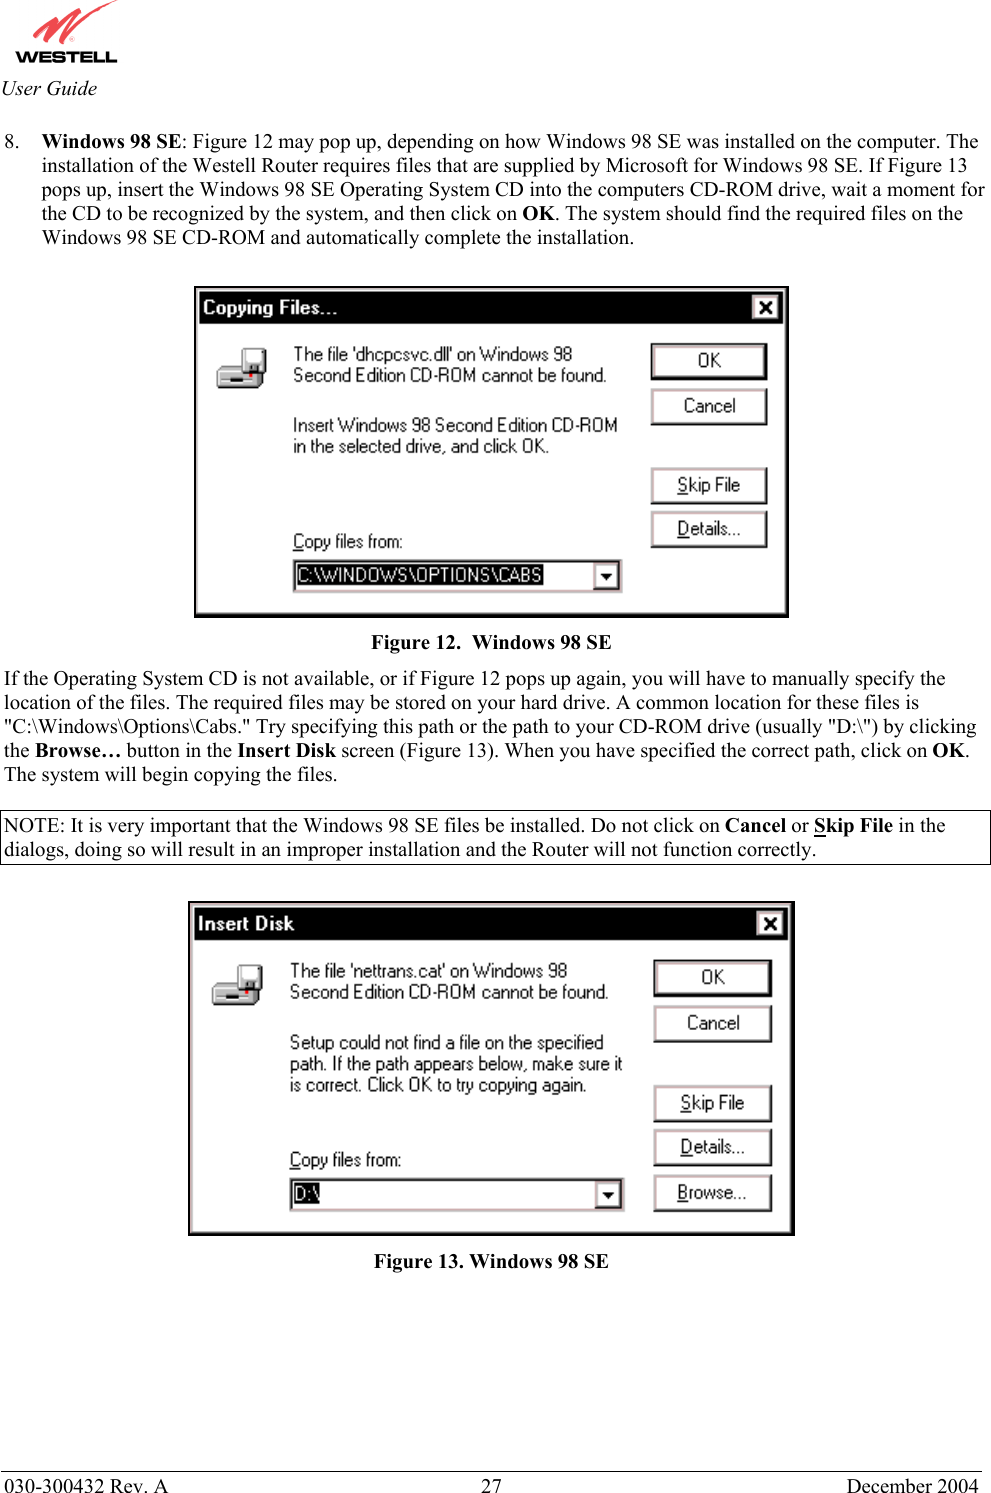       030-300432 Rev. A  27 December 2004  User Guide 8.  Windows 98 SE: Figure 12 may pop up, depending on how Windows 98 SE was installed on the computer. The installation of the Westell Router requires files that are supplied by Microsoft for Windows 98 SE. If Figure 13 pops up, insert the Windows 98 SE Operating System CD into the computers CD-ROM drive, wait a moment for the CD to be recognized by the system, and then click on OK. The system should find the required files on the Windows 98 SE CD-ROM and automatically complete the installation.   Figure 12.  Windows 98 SE If the Operating System CD is not available, or if Figure 12 pops up again, you will have to manually specify the location of the files. The required files may be stored on your hard drive. A common location for these files is &quot;C:\Windows\Options\Cabs.&quot; Try specifying this path or the path to your CD-ROM drive (usually &quot;D:\&quot;) by clicking the Browse… button in the Insert Disk screen (Figure 13). When you have specified the correct path, click on OK. The system will begin copying the files.  NOTE: It is very important that the Windows 98 SE files be installed. Do not click on Cancel or Skip File in the dialogs, doing so will result in an improper installation and the Router will not function correctly.   Figure 13. Windows 98 SE        